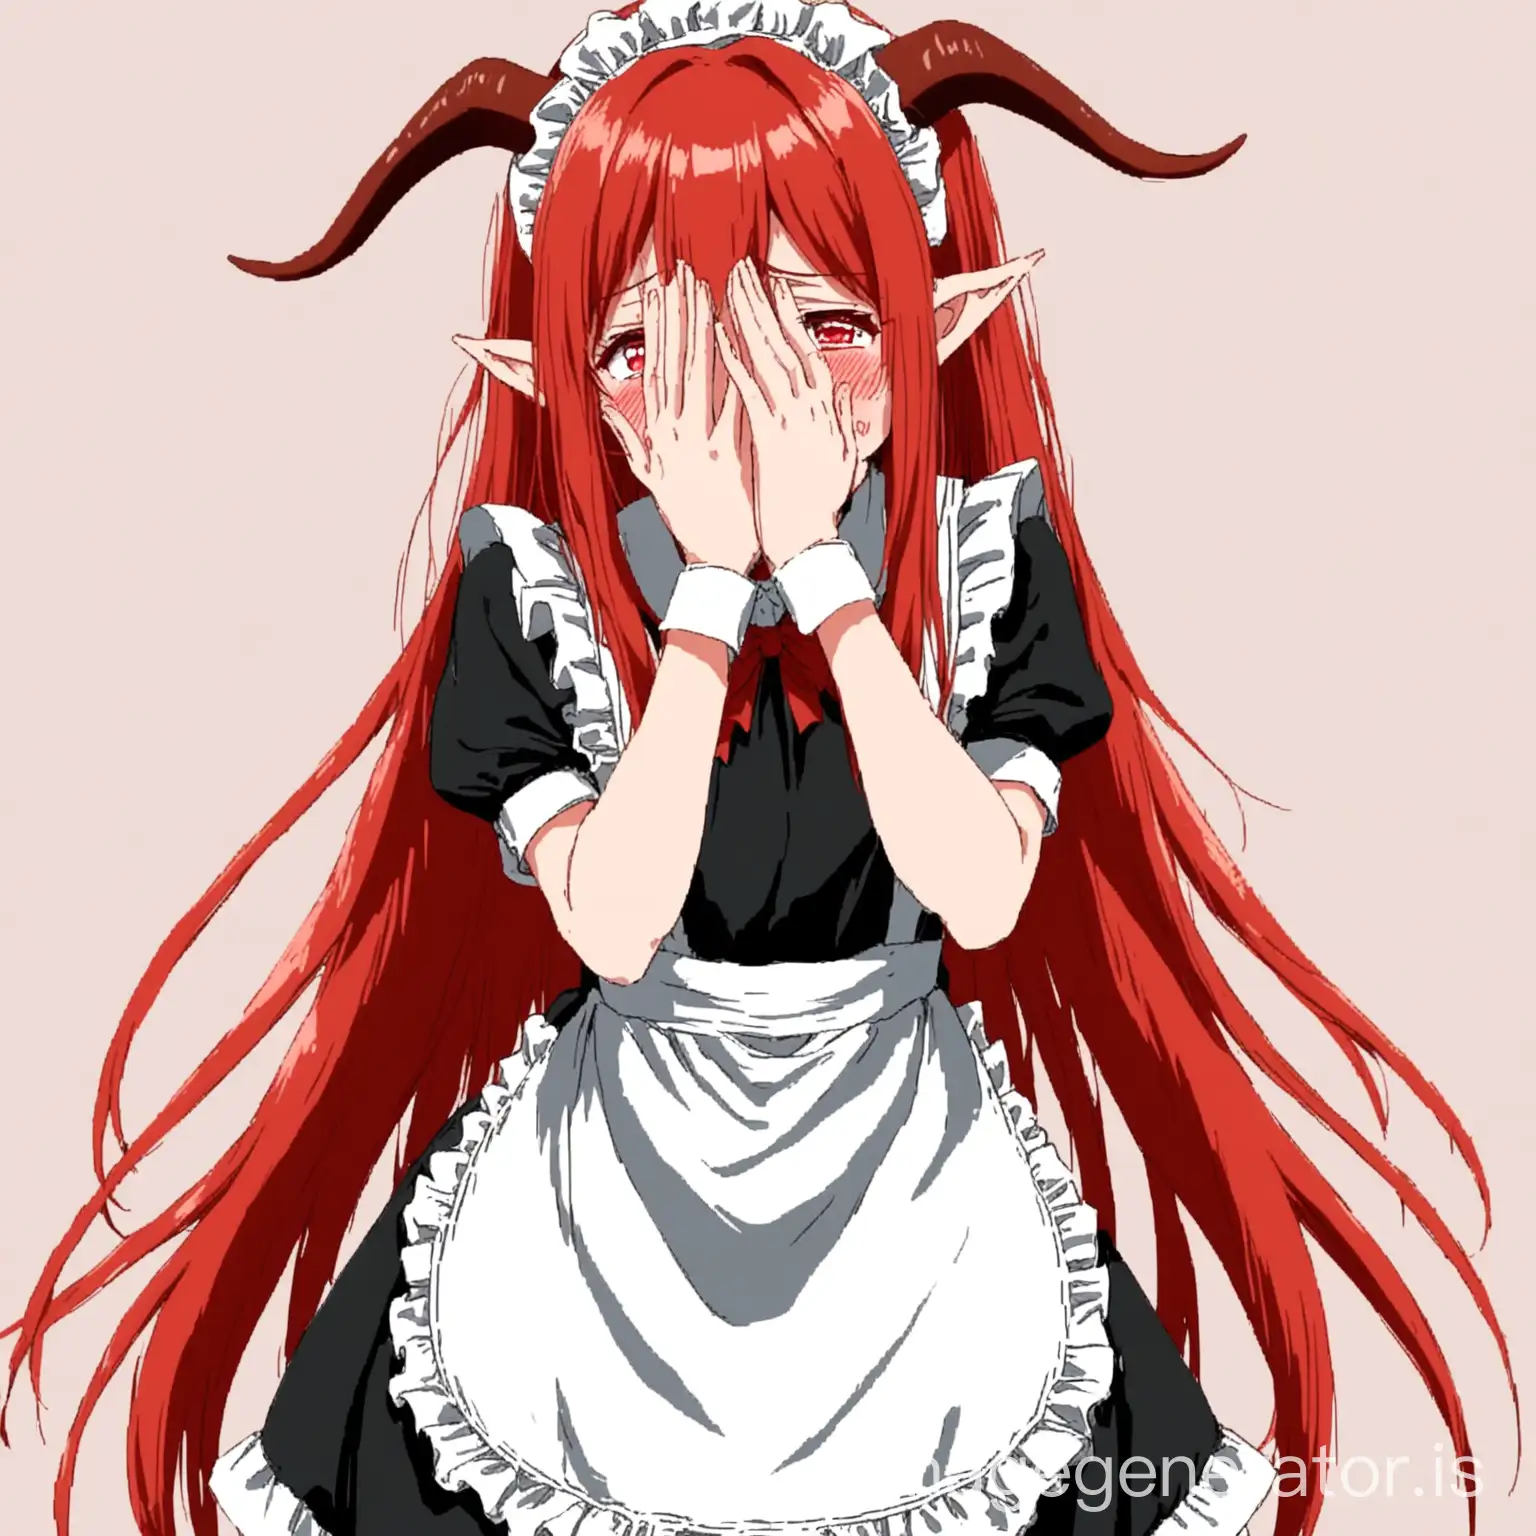 Anime girl with elf ears and small skin colored horns.
Red long hair.
Maid outfit. Collar. 
Covering face with both hands with blush.
Flustered red blush.
Emberessed pose.
Full body in picture.

